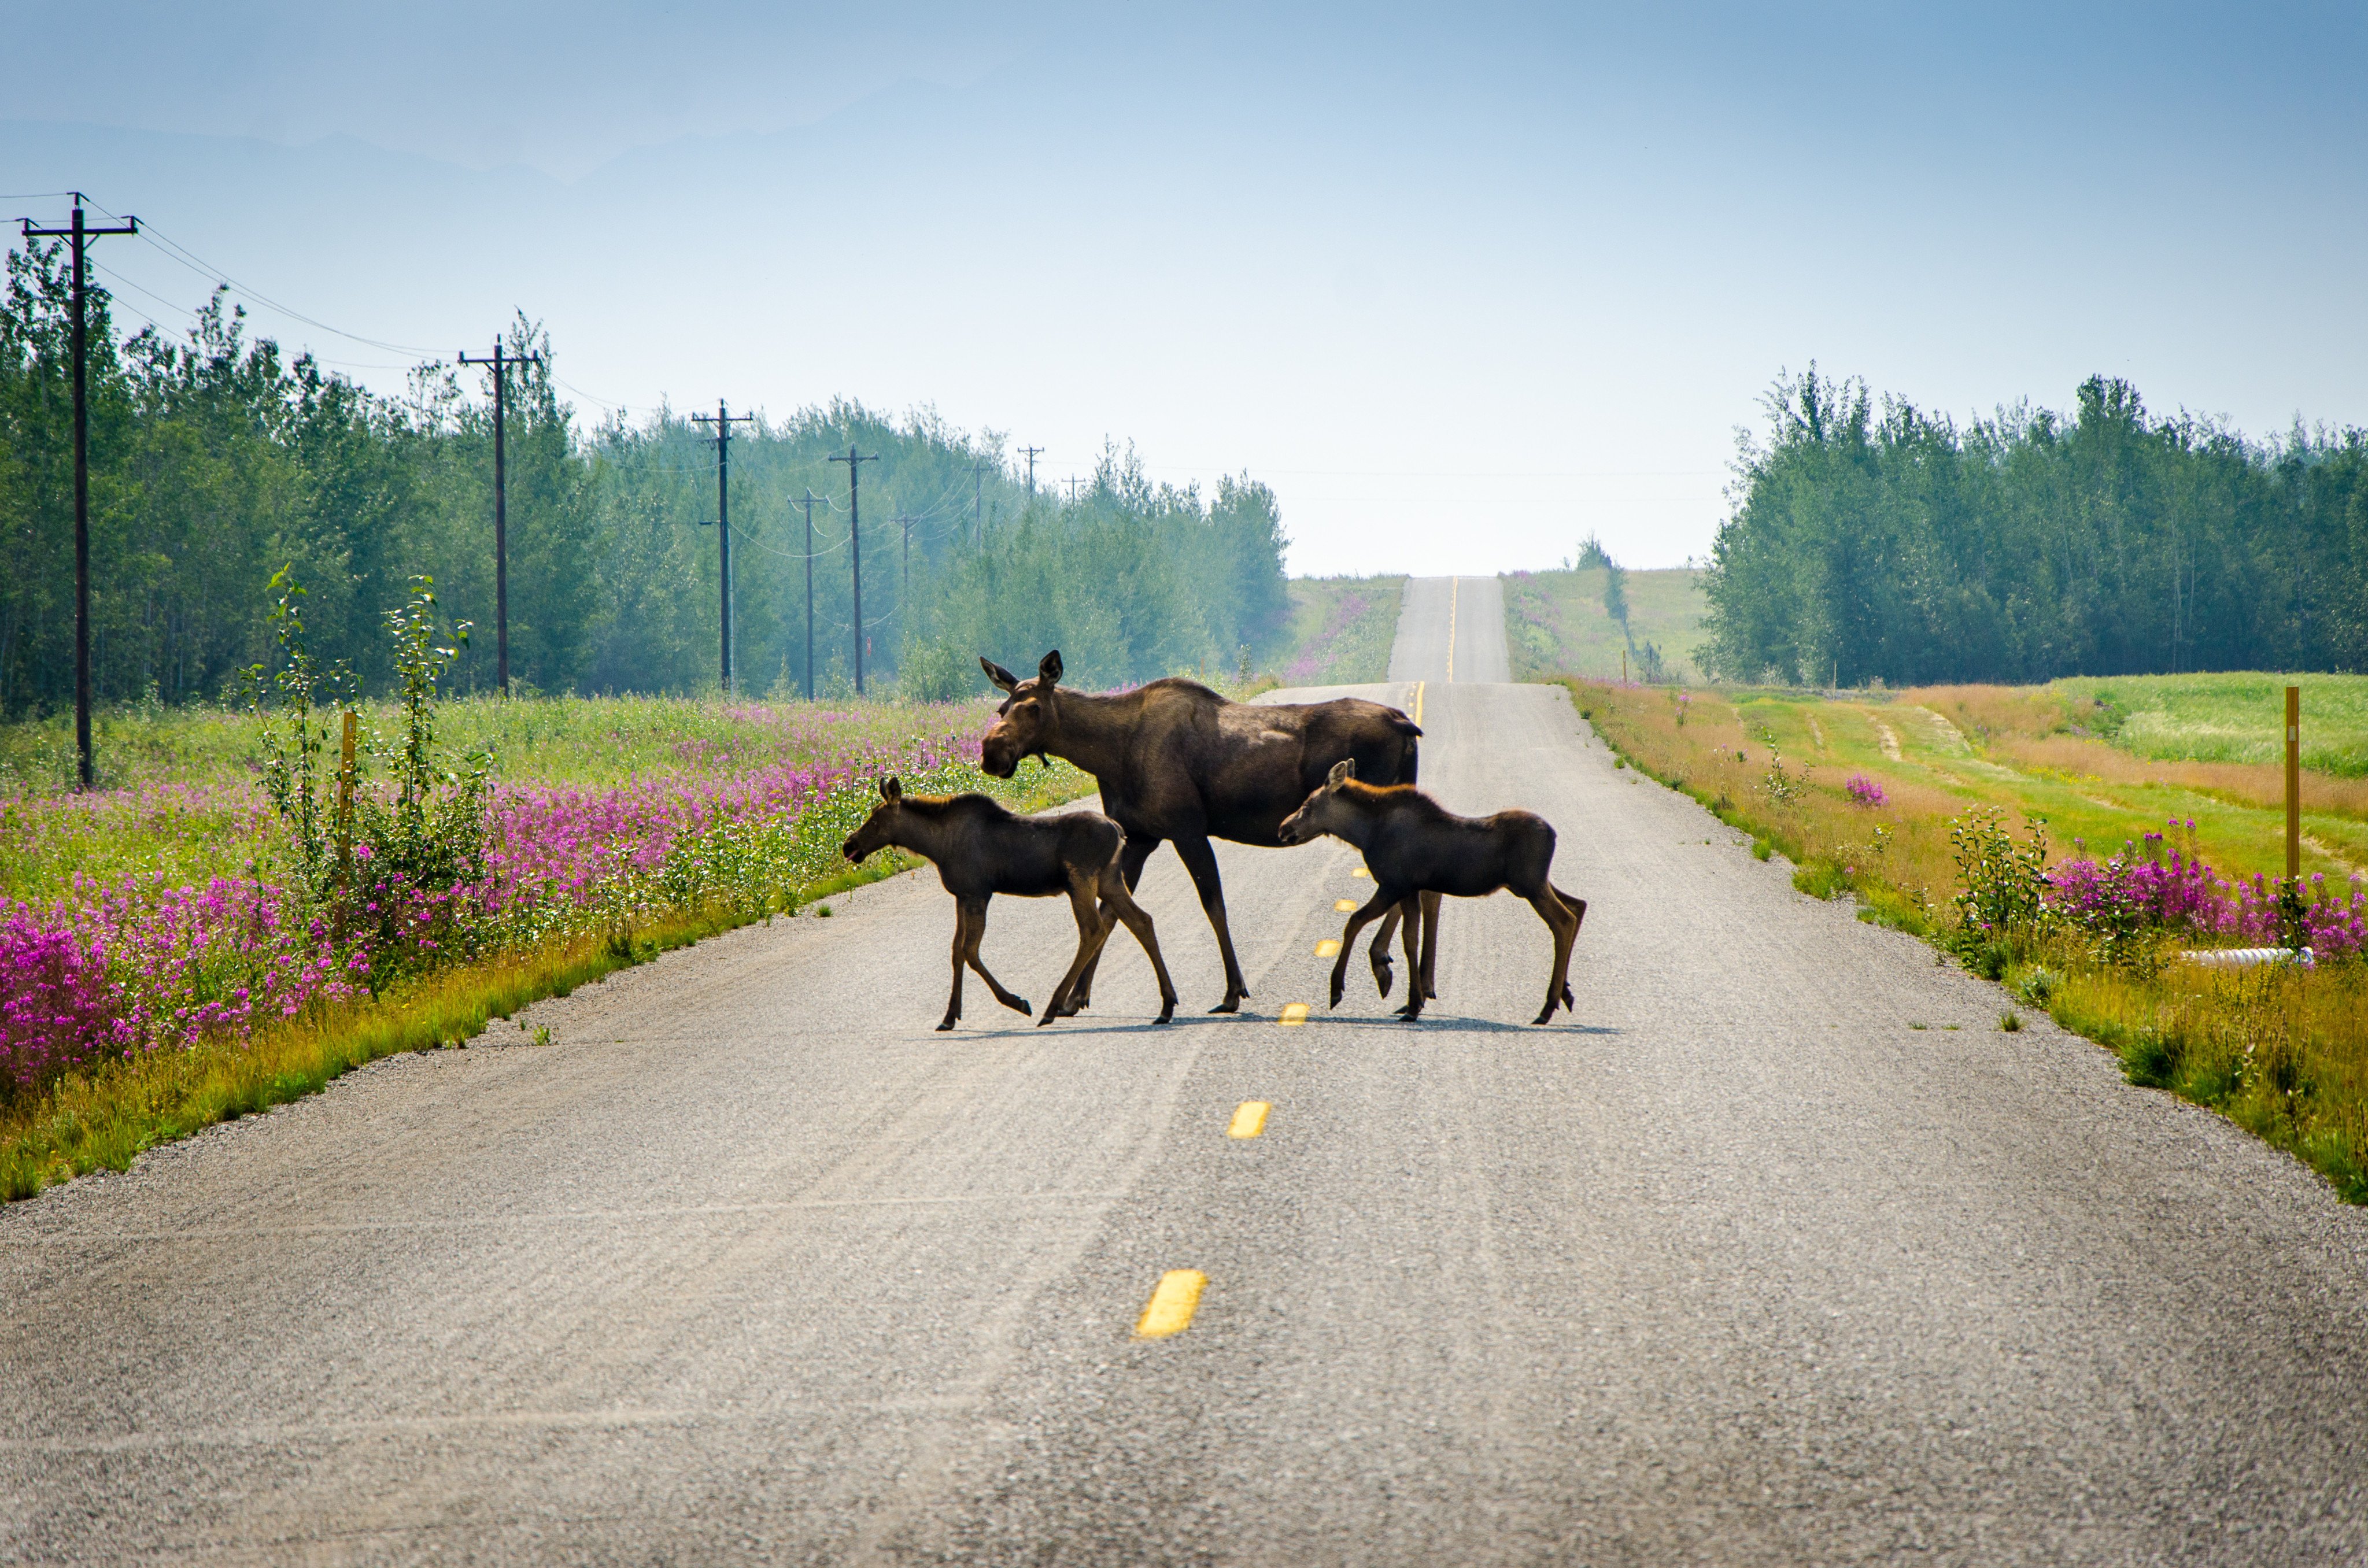 There are up to 200,000 moose in Alaska, a state with a human population of about 737,000. File photo: Shutterstock